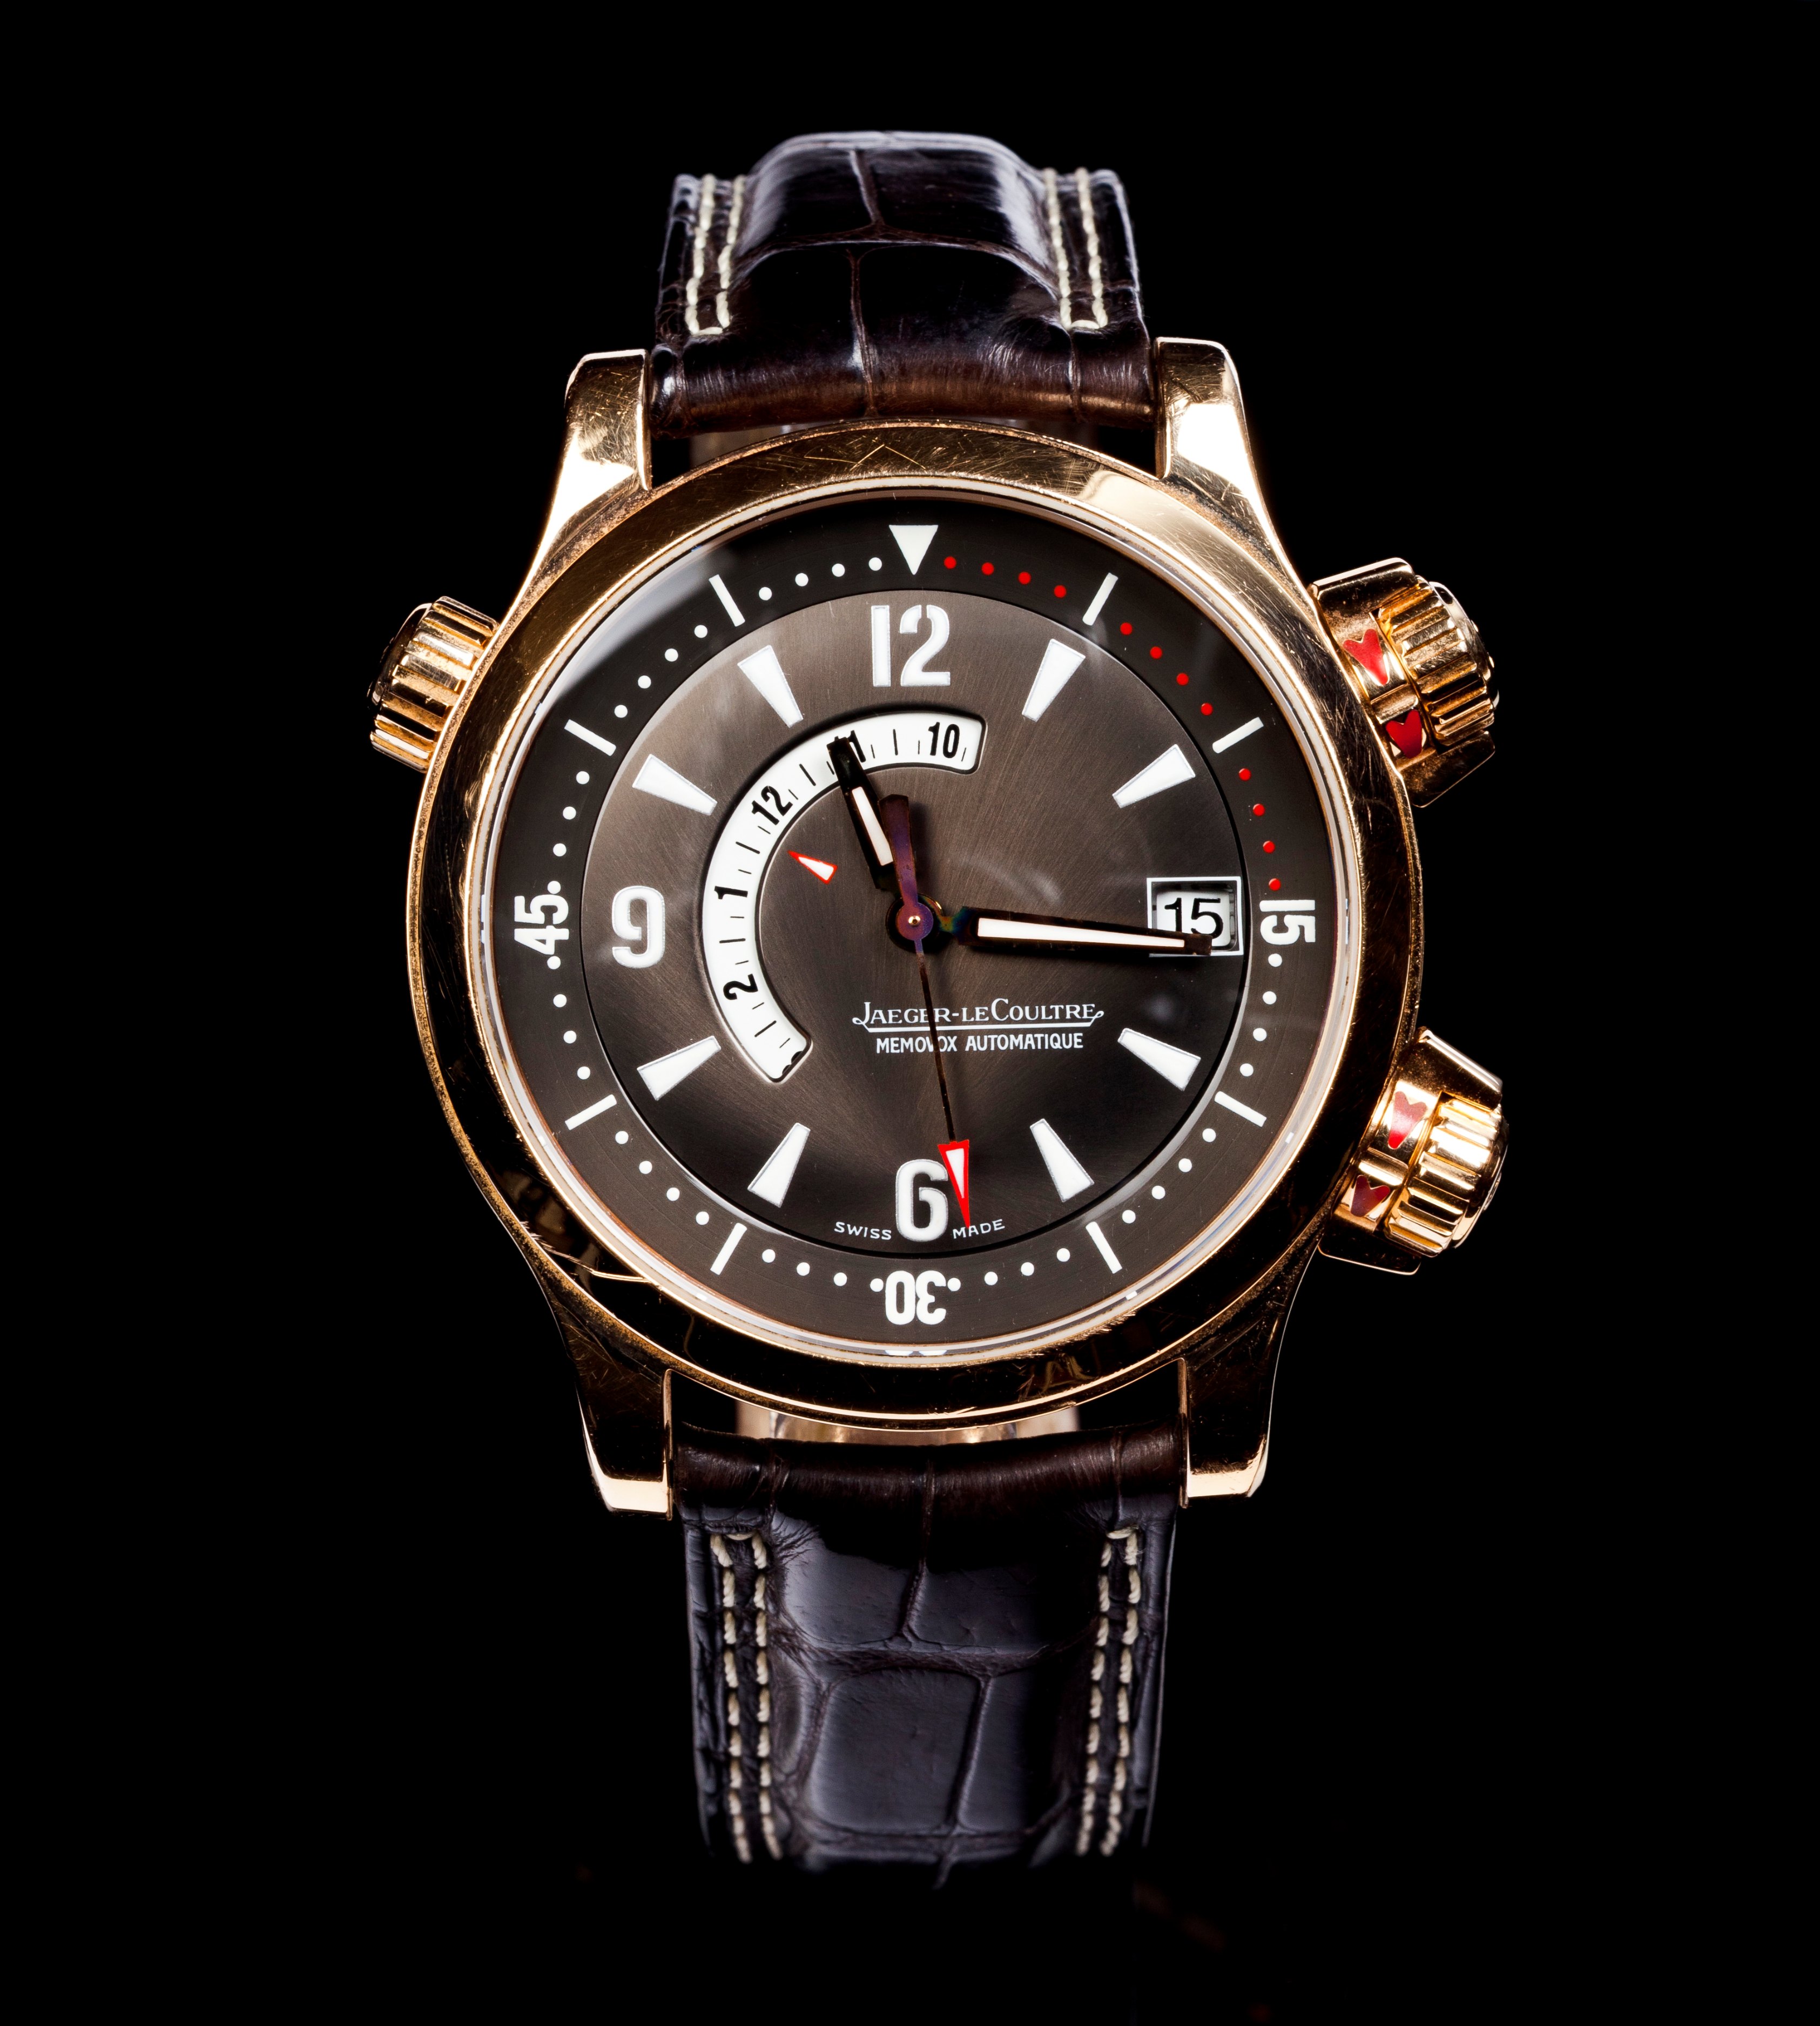 Jaeger LeCoultre - Image 2 of 3